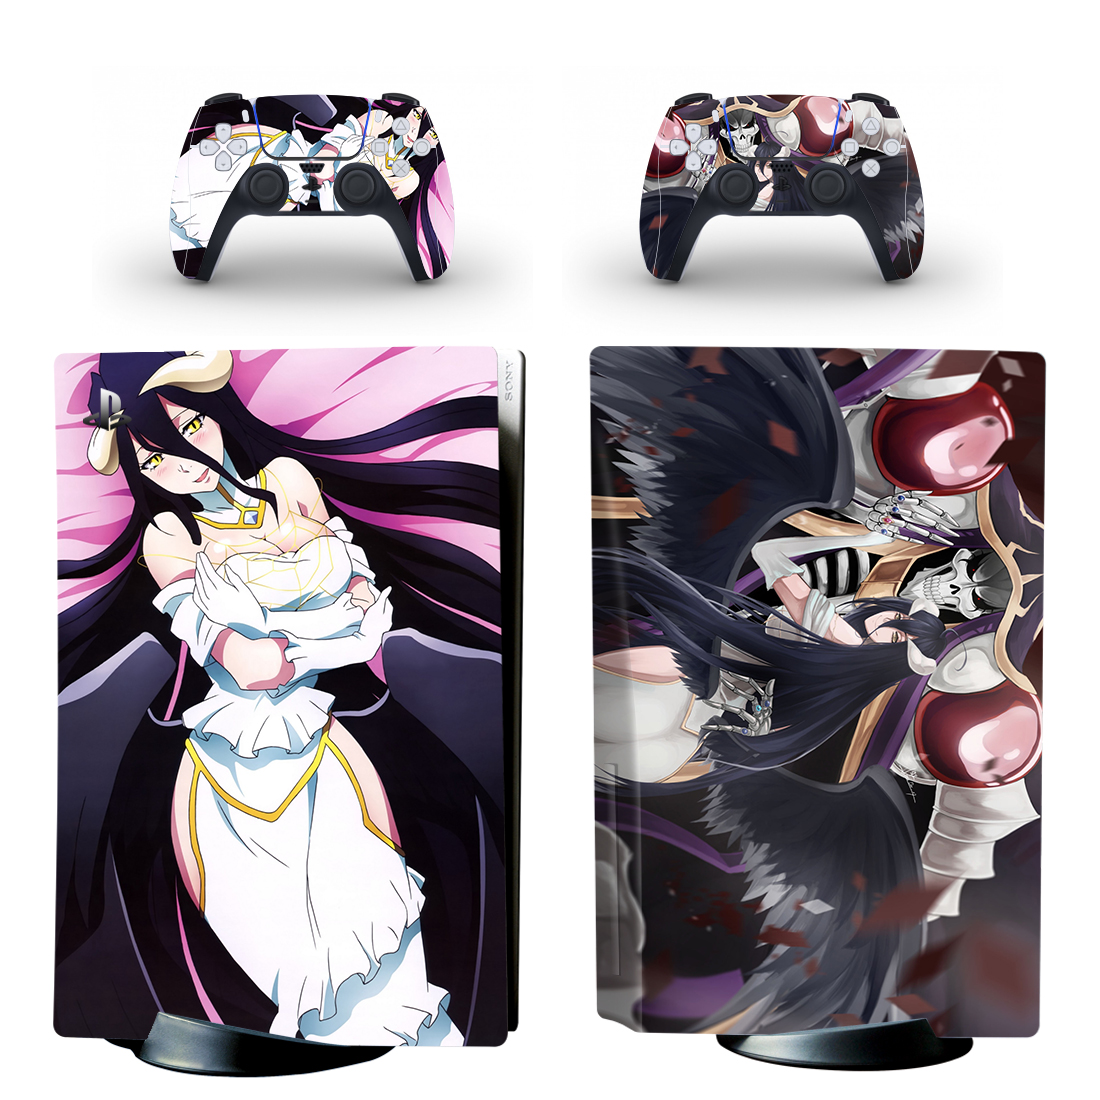 Albedo Overlord Skin Sticker Decal For PS5 Digital Edition And Controllers